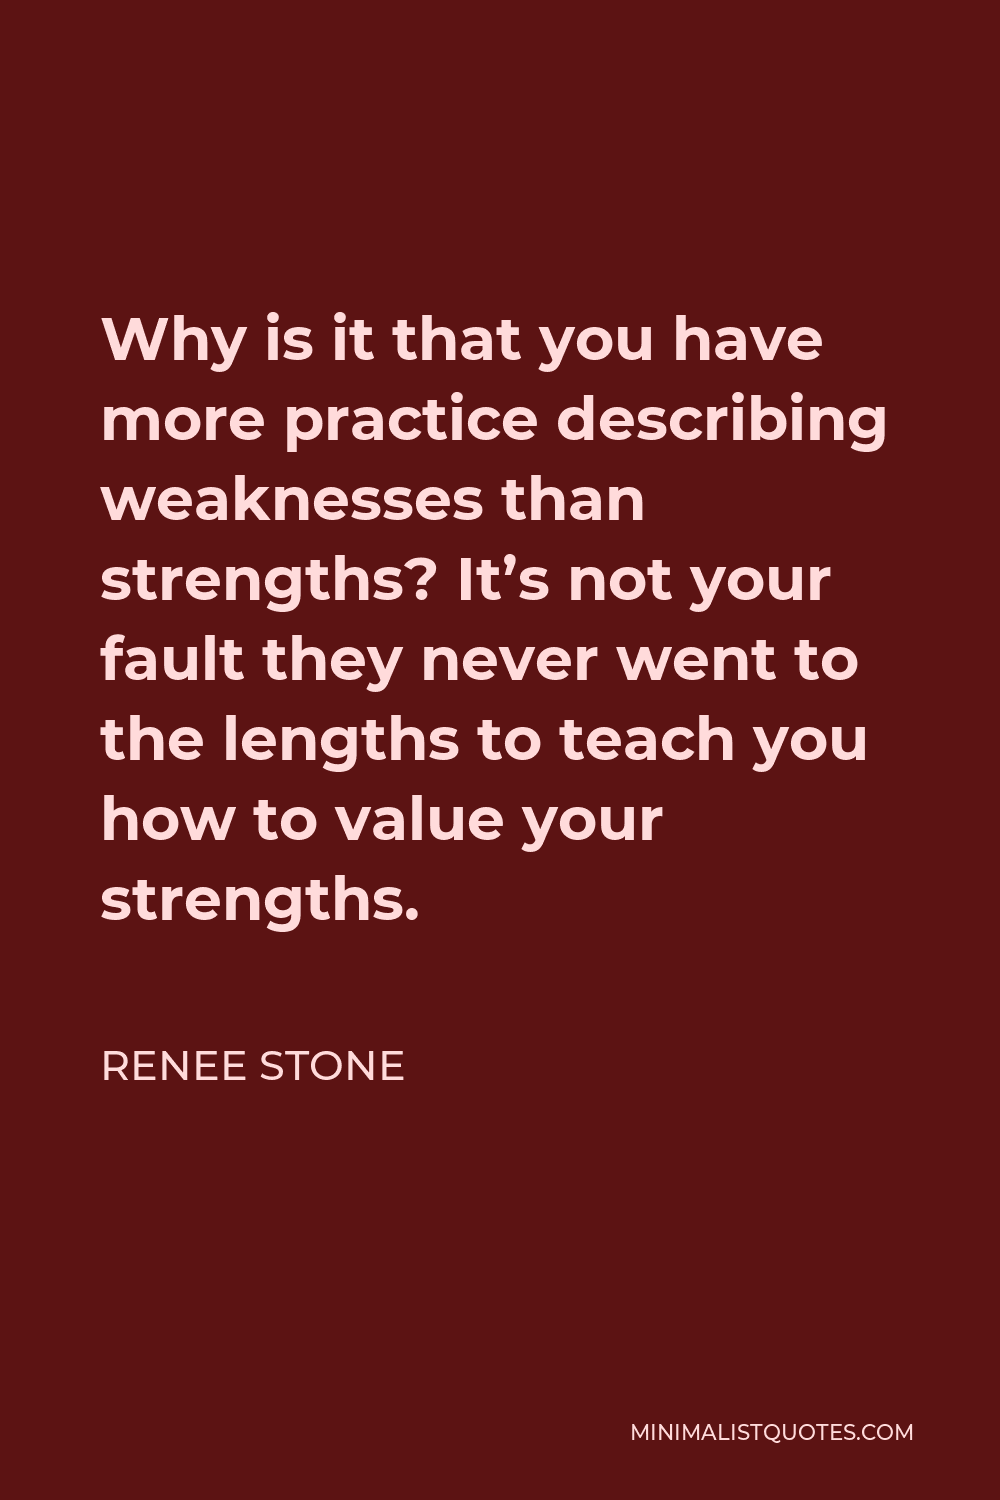 Renee Stone Quote - Why is it that you have more practice describing weaknesses than strengths? It’s not your fault they never went to the lengths to teach you how to value your strengths.